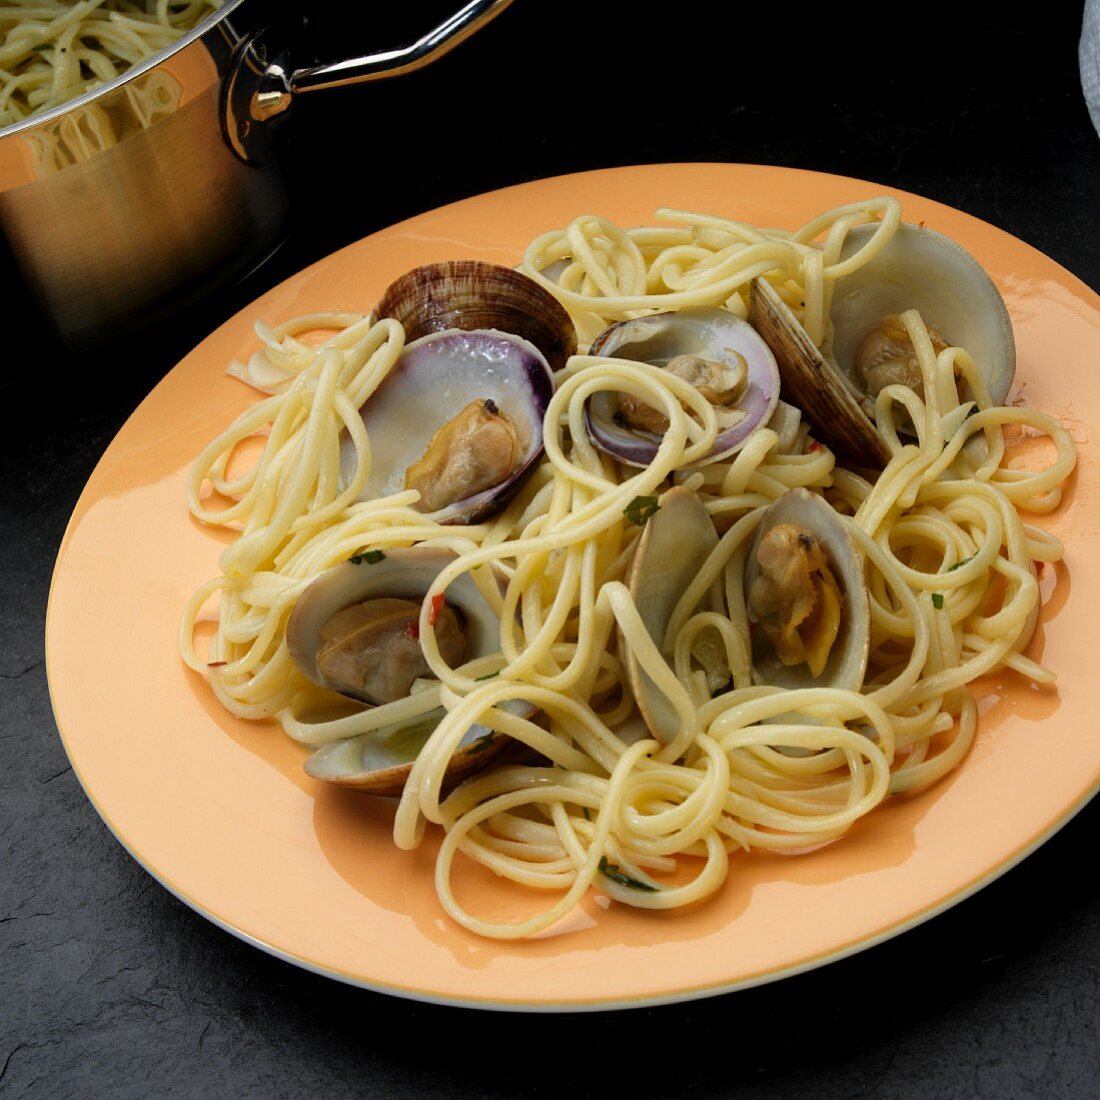 Little neck clams with spaghetti